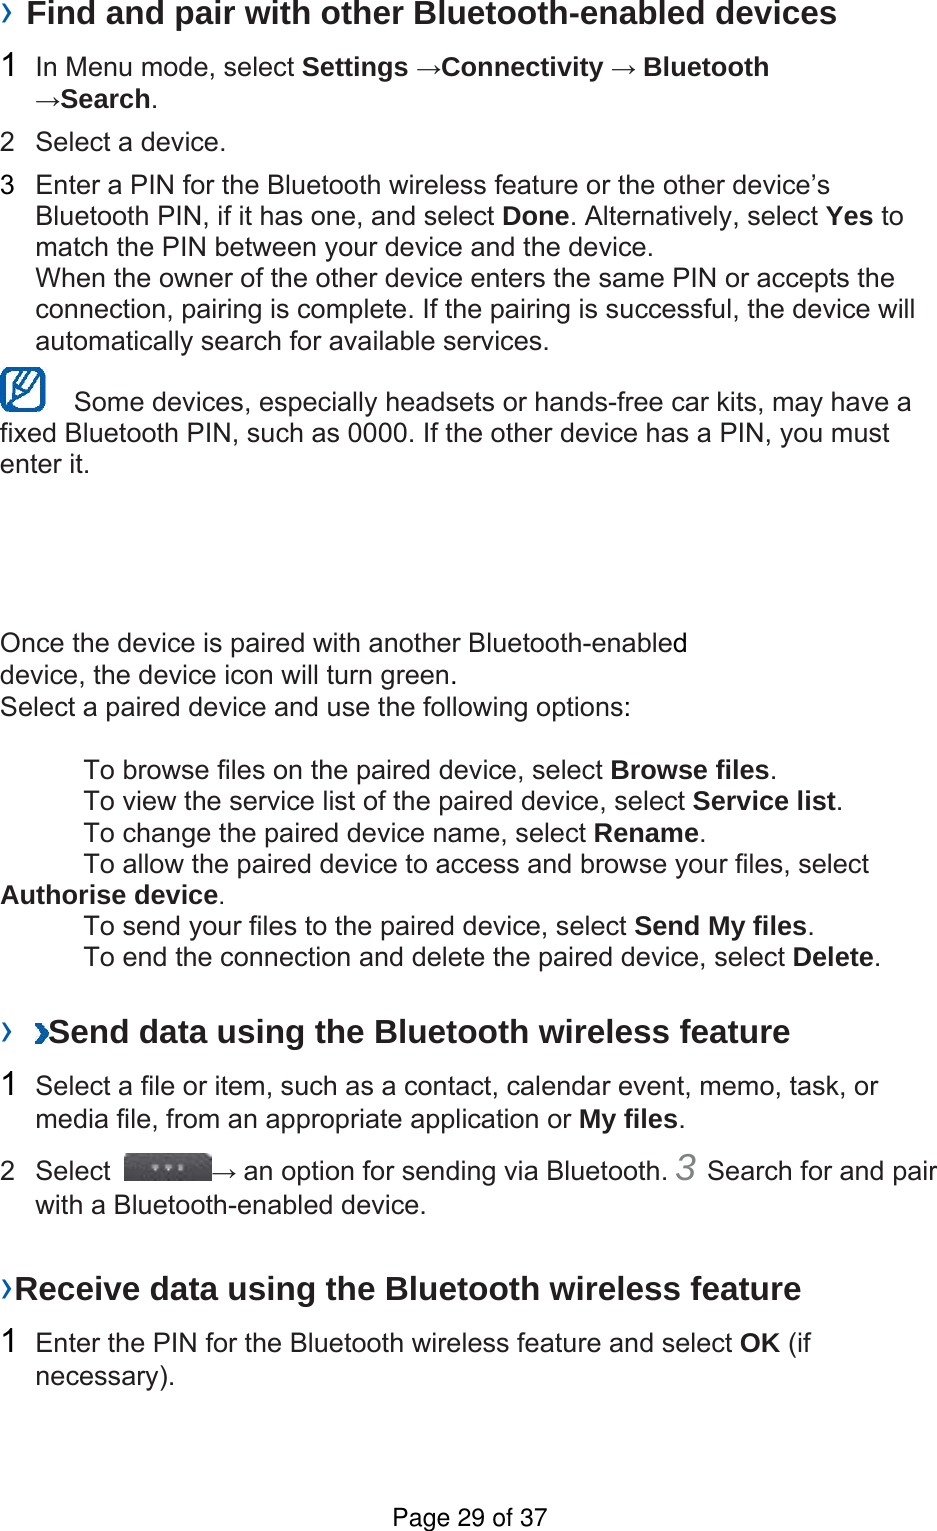 › Find and pair with other Bluetooth-enabled devices   1  In Menu mode, select Settings →Connectivity → Bluetooth →Search.  2  Select a device.   3  Enter a PIN for the Bluetooth wireless feature or the other device’s Bluetooth PIN, if it has one, and select Done. Alternatively, select Yes to match the PIN between your device and the device.   When the owner of the other device enters the same PIN or accepts the connection, pairing is complete. If the pairing is successful, the device will automatically search for available services.     Some devices, especially headsets or hands-free car kits, may have a fixed Bluetooth PIN, such as 0000. If the other device has a PIN, you must enter it.   Once the device is paired with another Bluetooth-enabled device, the device icon will turn green. Select a paired device and use the following options:    To browse files on the paired device, select Browse files.    To view the service list of the paired device, select Service list.    To change the paired device name, select Rename.   To allow the paired device to access and browse your files, select Authorise device.    To send your files to the paired device, select Send My files.    To end the connection and delete the paired device, select Delete.   ›  Send data using the Bluetooth wireless feature   1  Select a file or item, such as a contact, calendar event, memo, task, or media file, from an appropriate application or My files.  2 Select  → an option for sending via Bluetooth. 3 Search for and pair with a Bluetooth-enabled device.   ›Receive data using the Bluetooth wireless feature   1  Enter the PIN for the Bluetooth wireless feature and select OK (if necessary).  Page 29 of 37